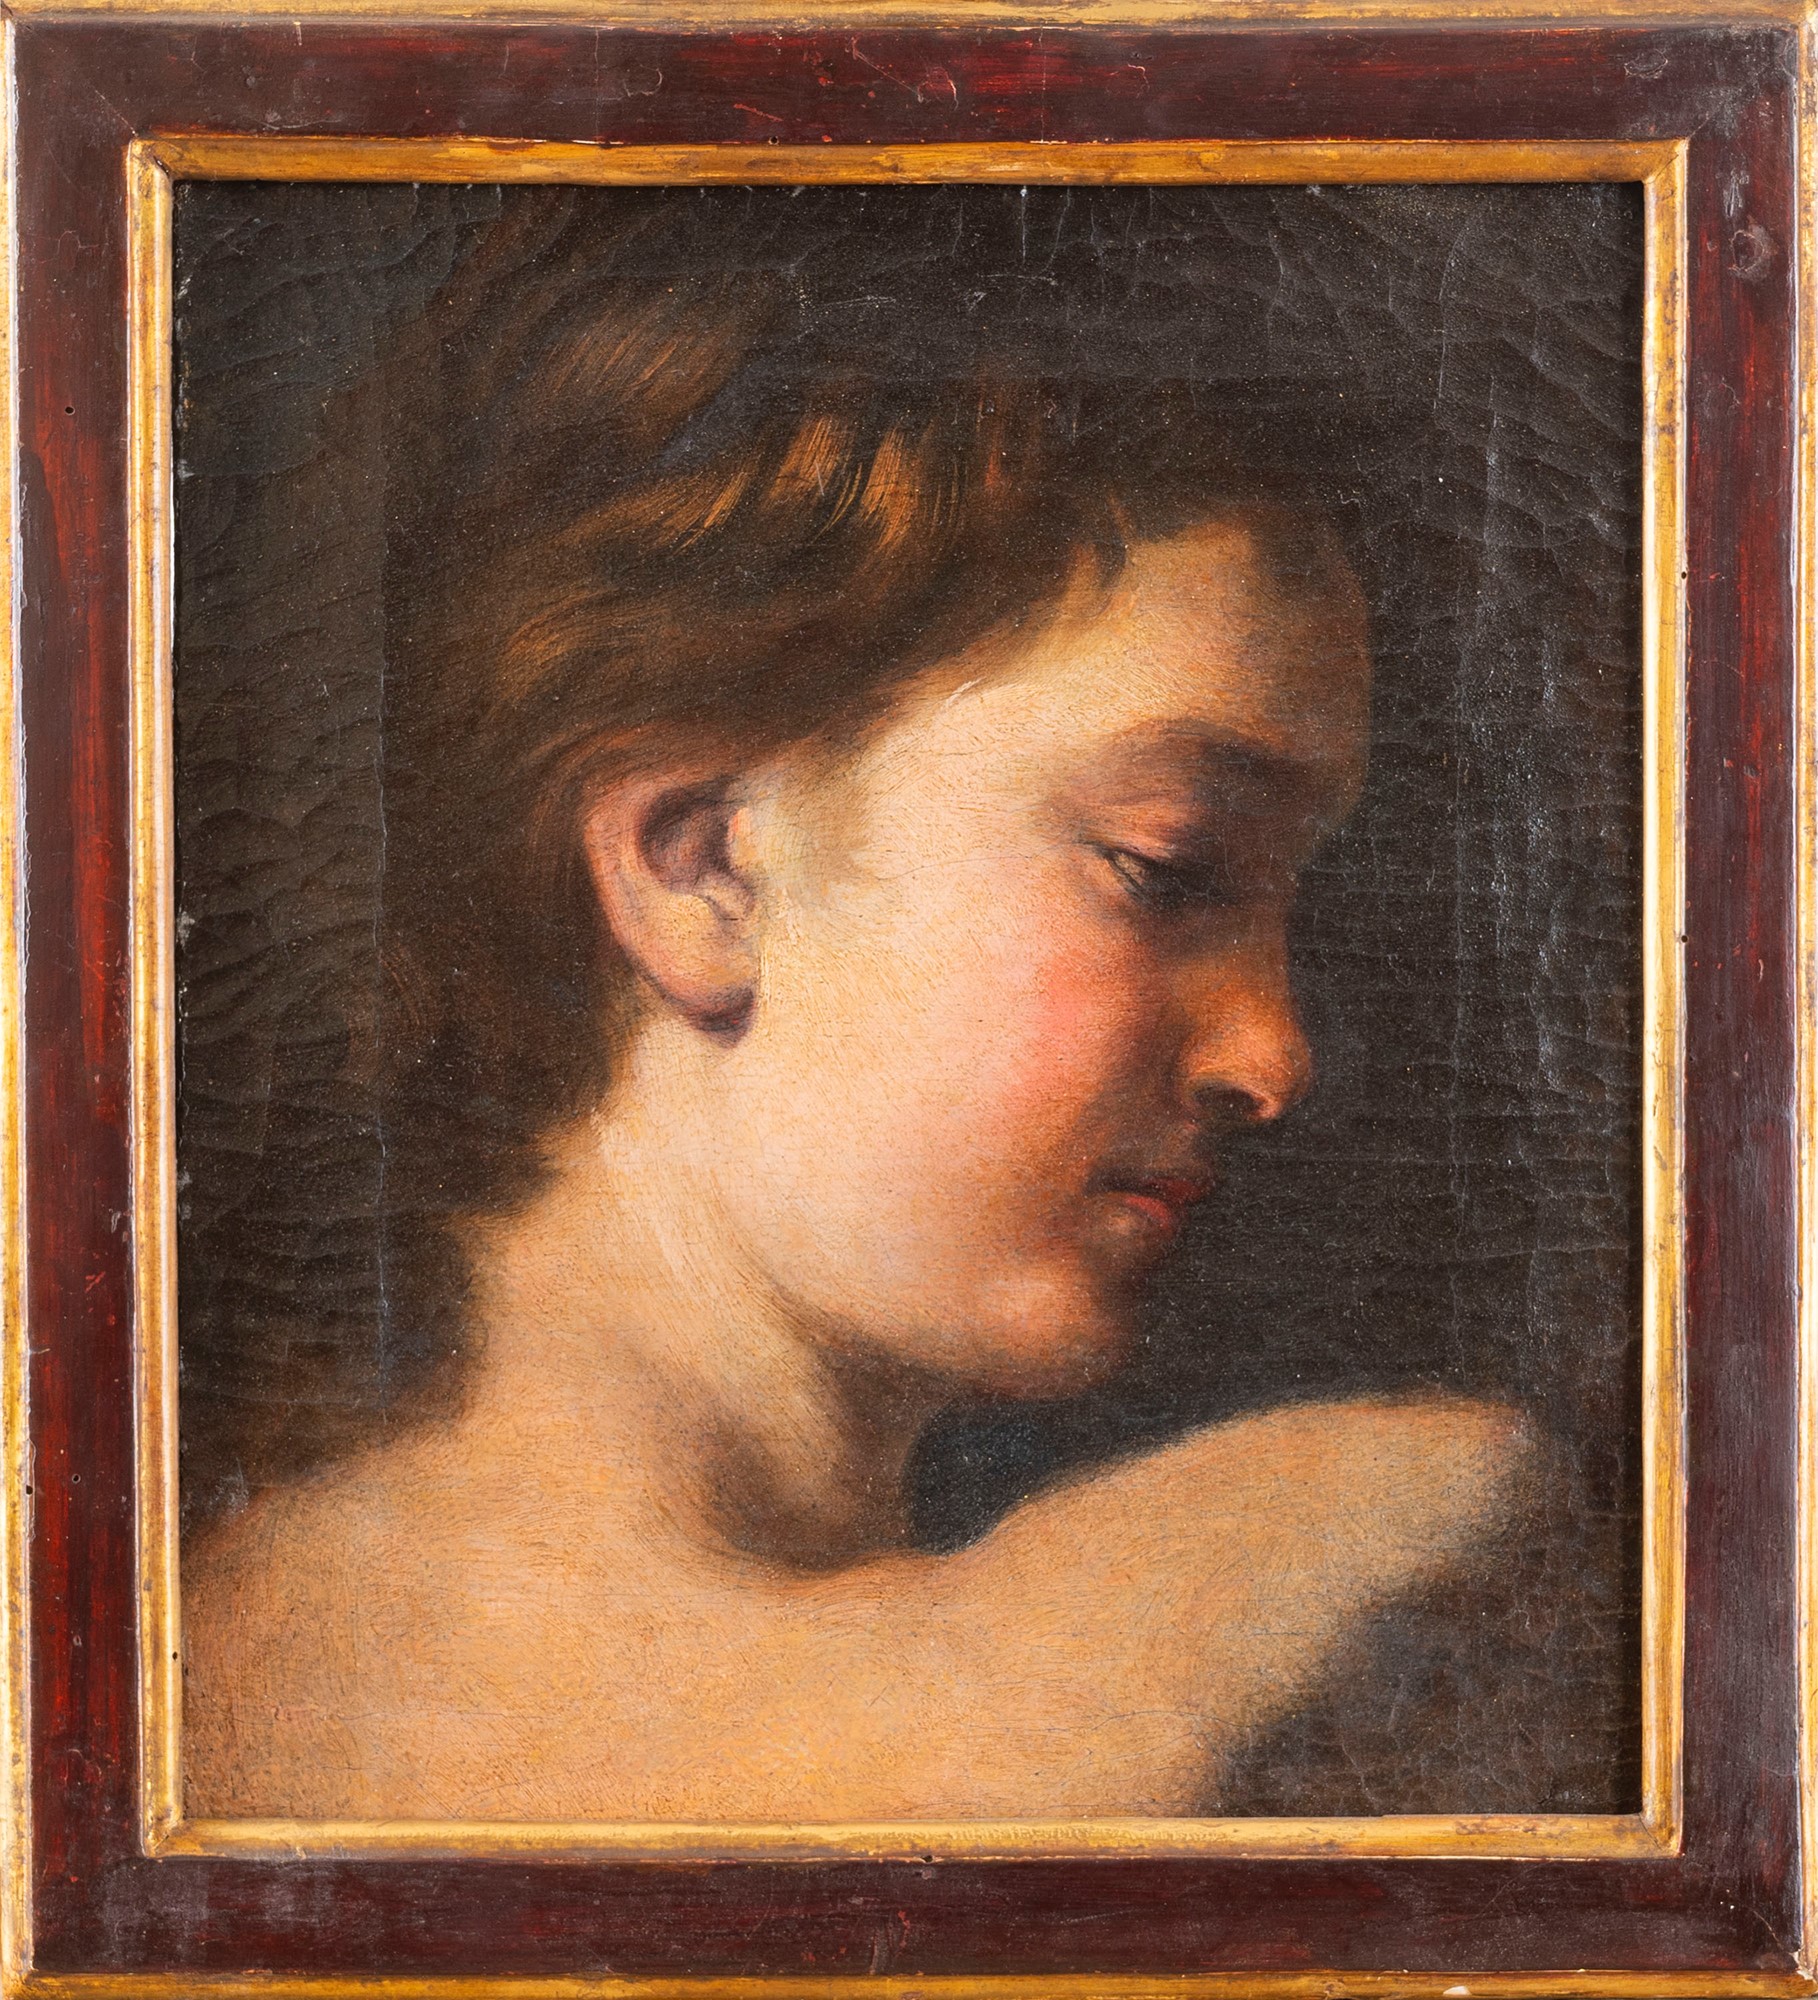 Tuscan School, XVII century - Study of a young man - Image 2 of 3